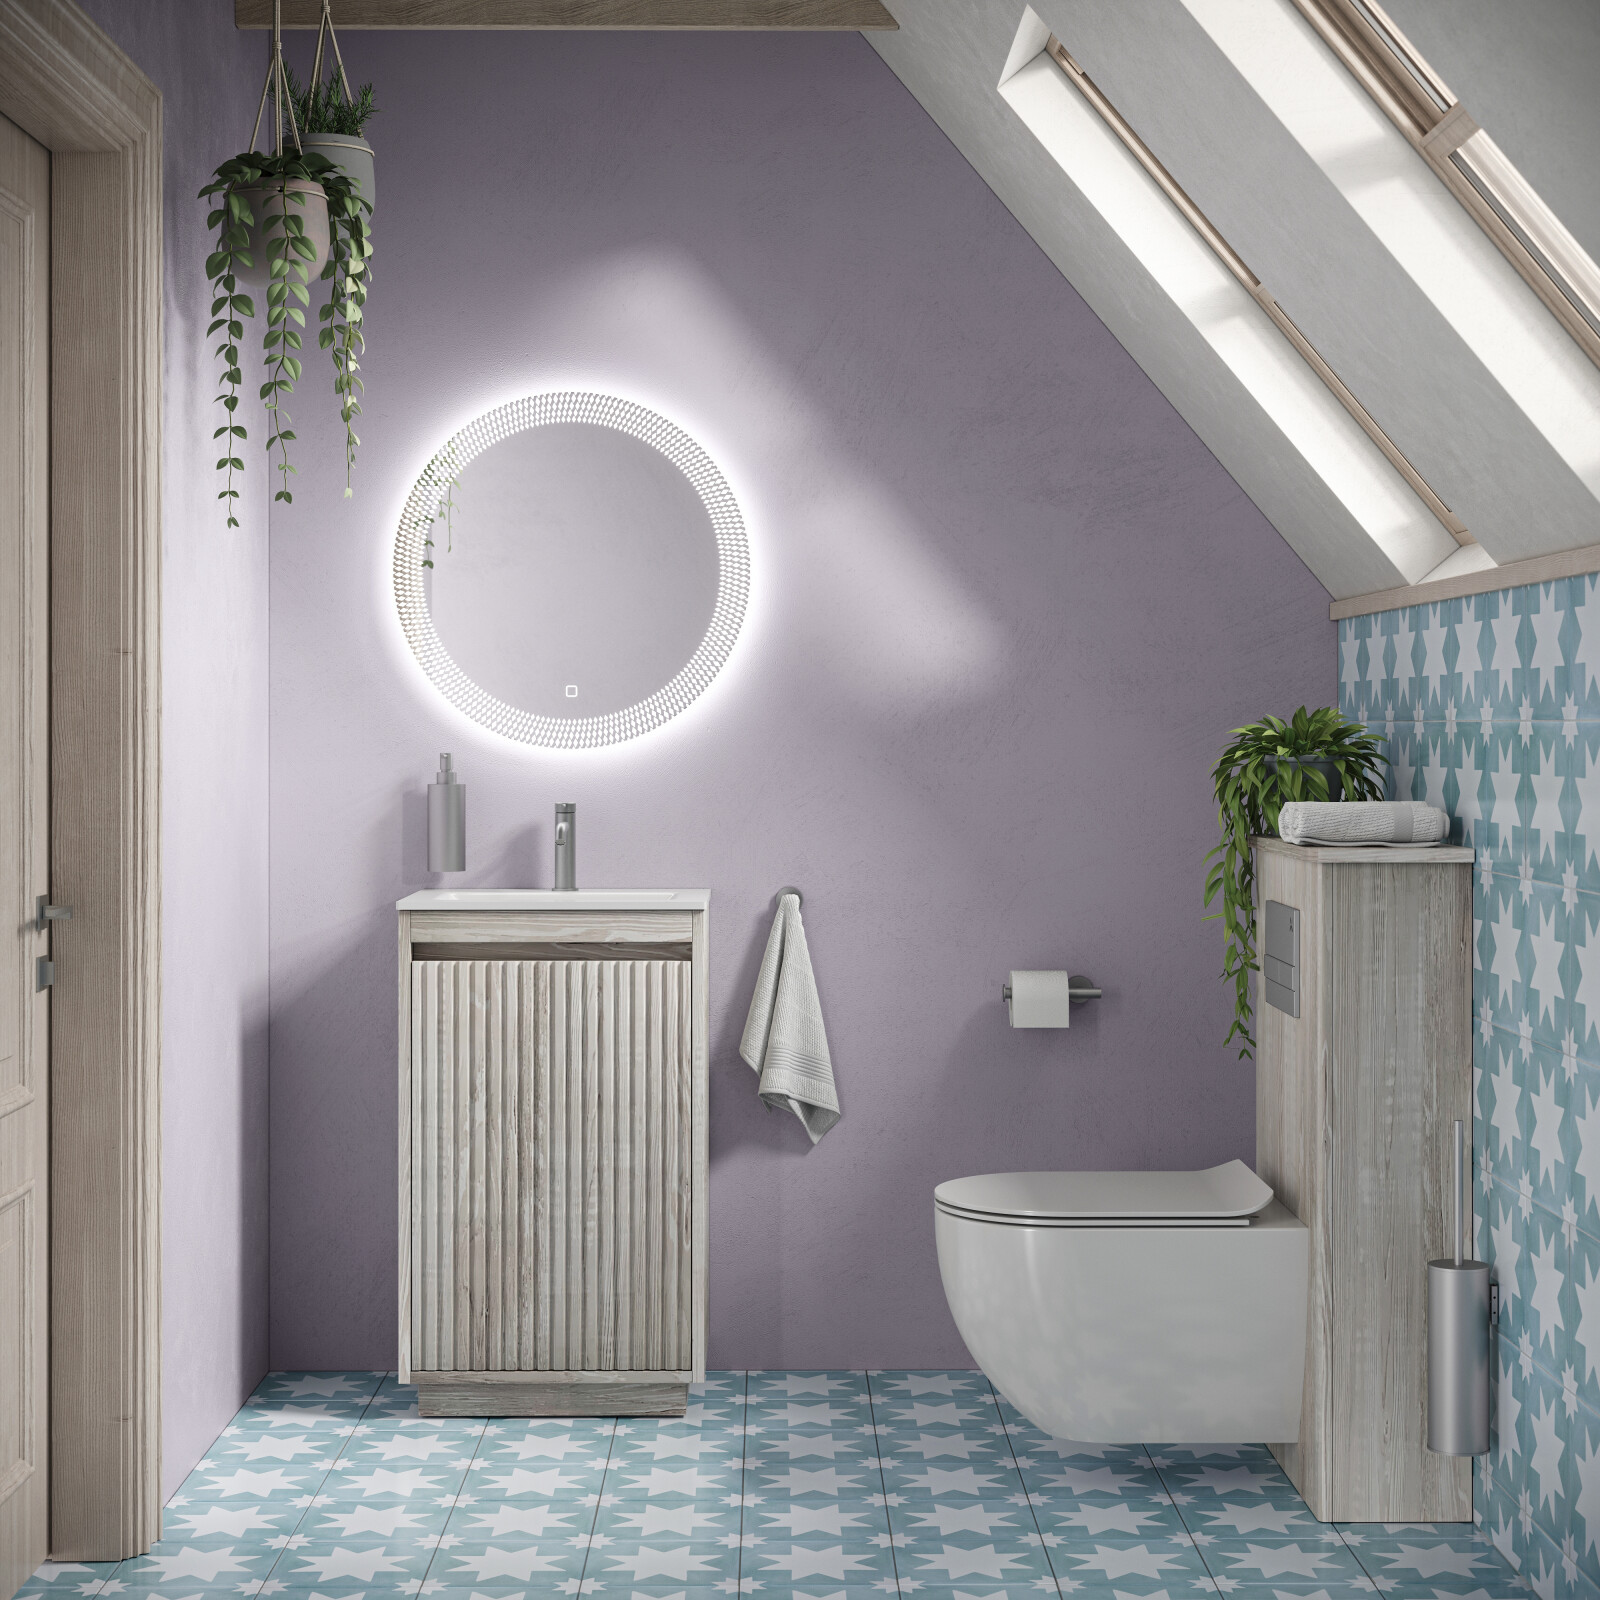 Product Lifestyle image of a lilac painted cloakroom bathroom featuring numrous products from Crosswater, including a wall mounted toilet with a wooden cistern housing, a slatted wooden washbasin unit and a round LED mirror